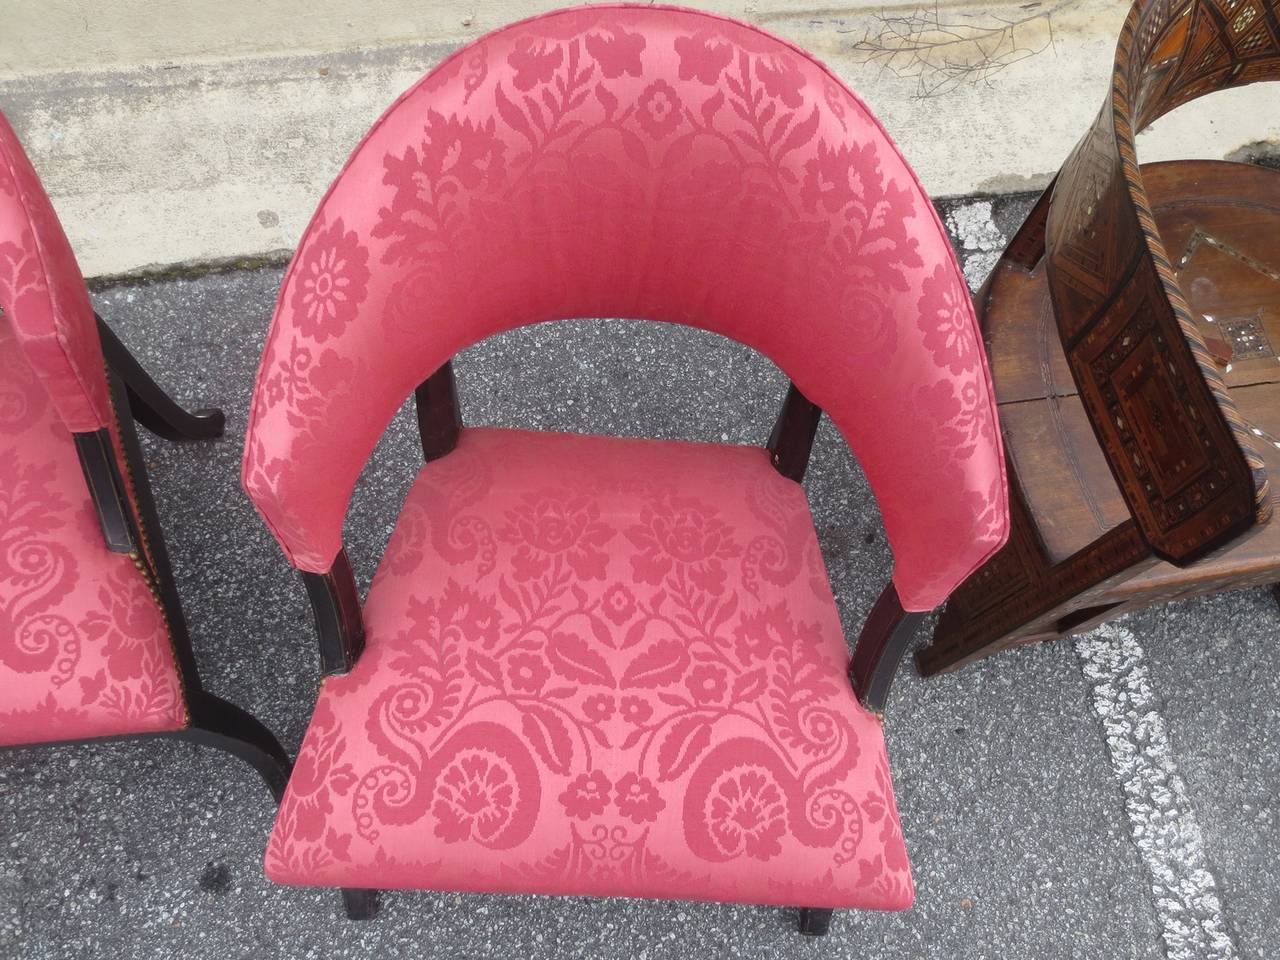 Pair of 19th century Regency style side chairs.